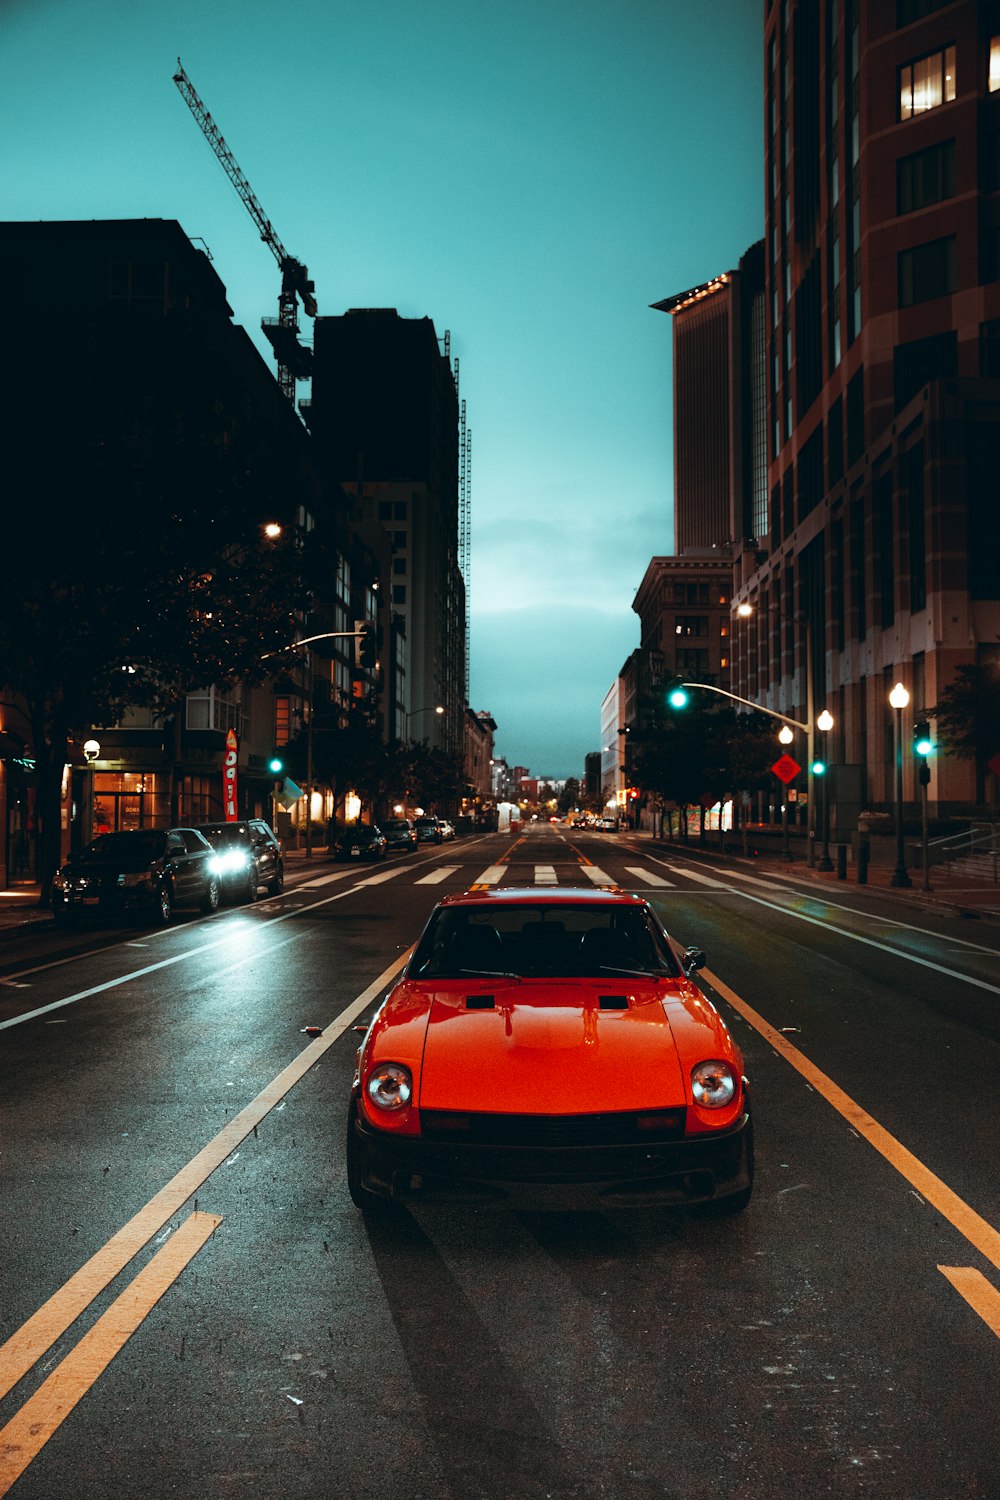 red car on road during night time